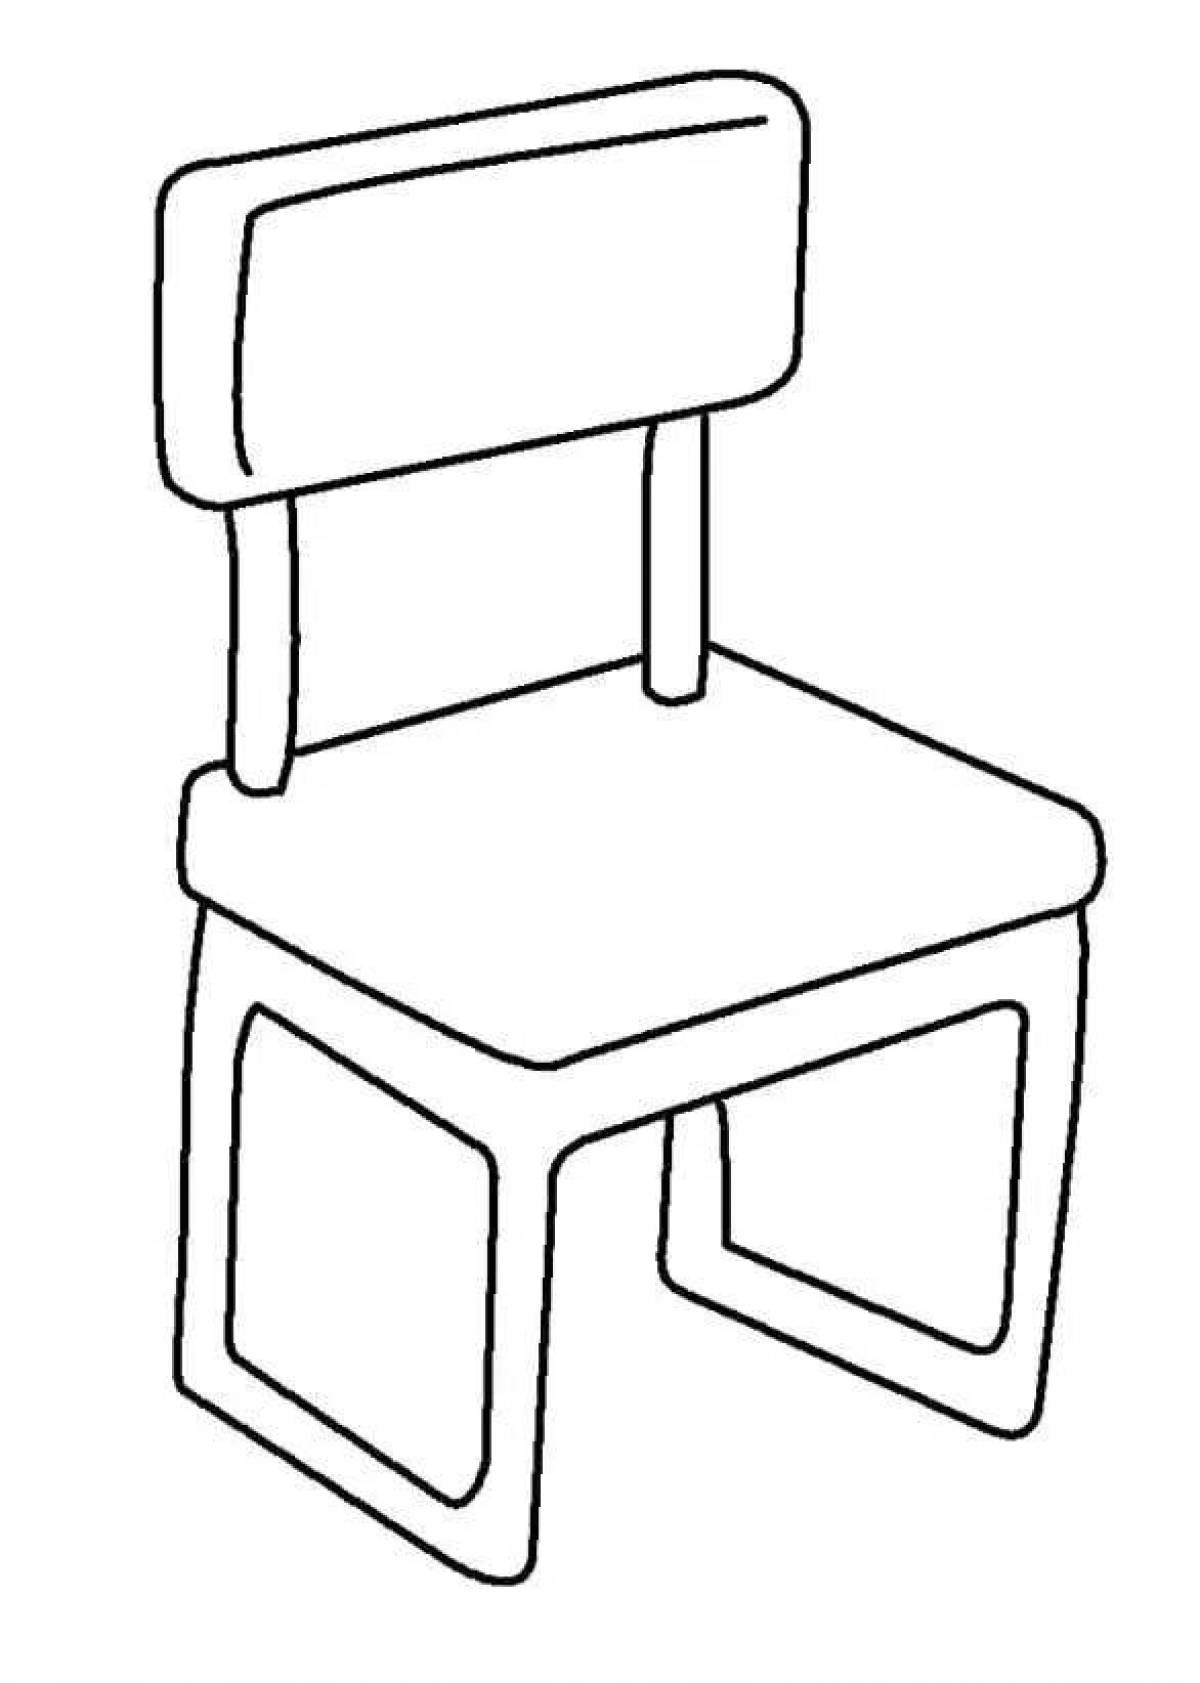 Colouring a cheerful chair for children